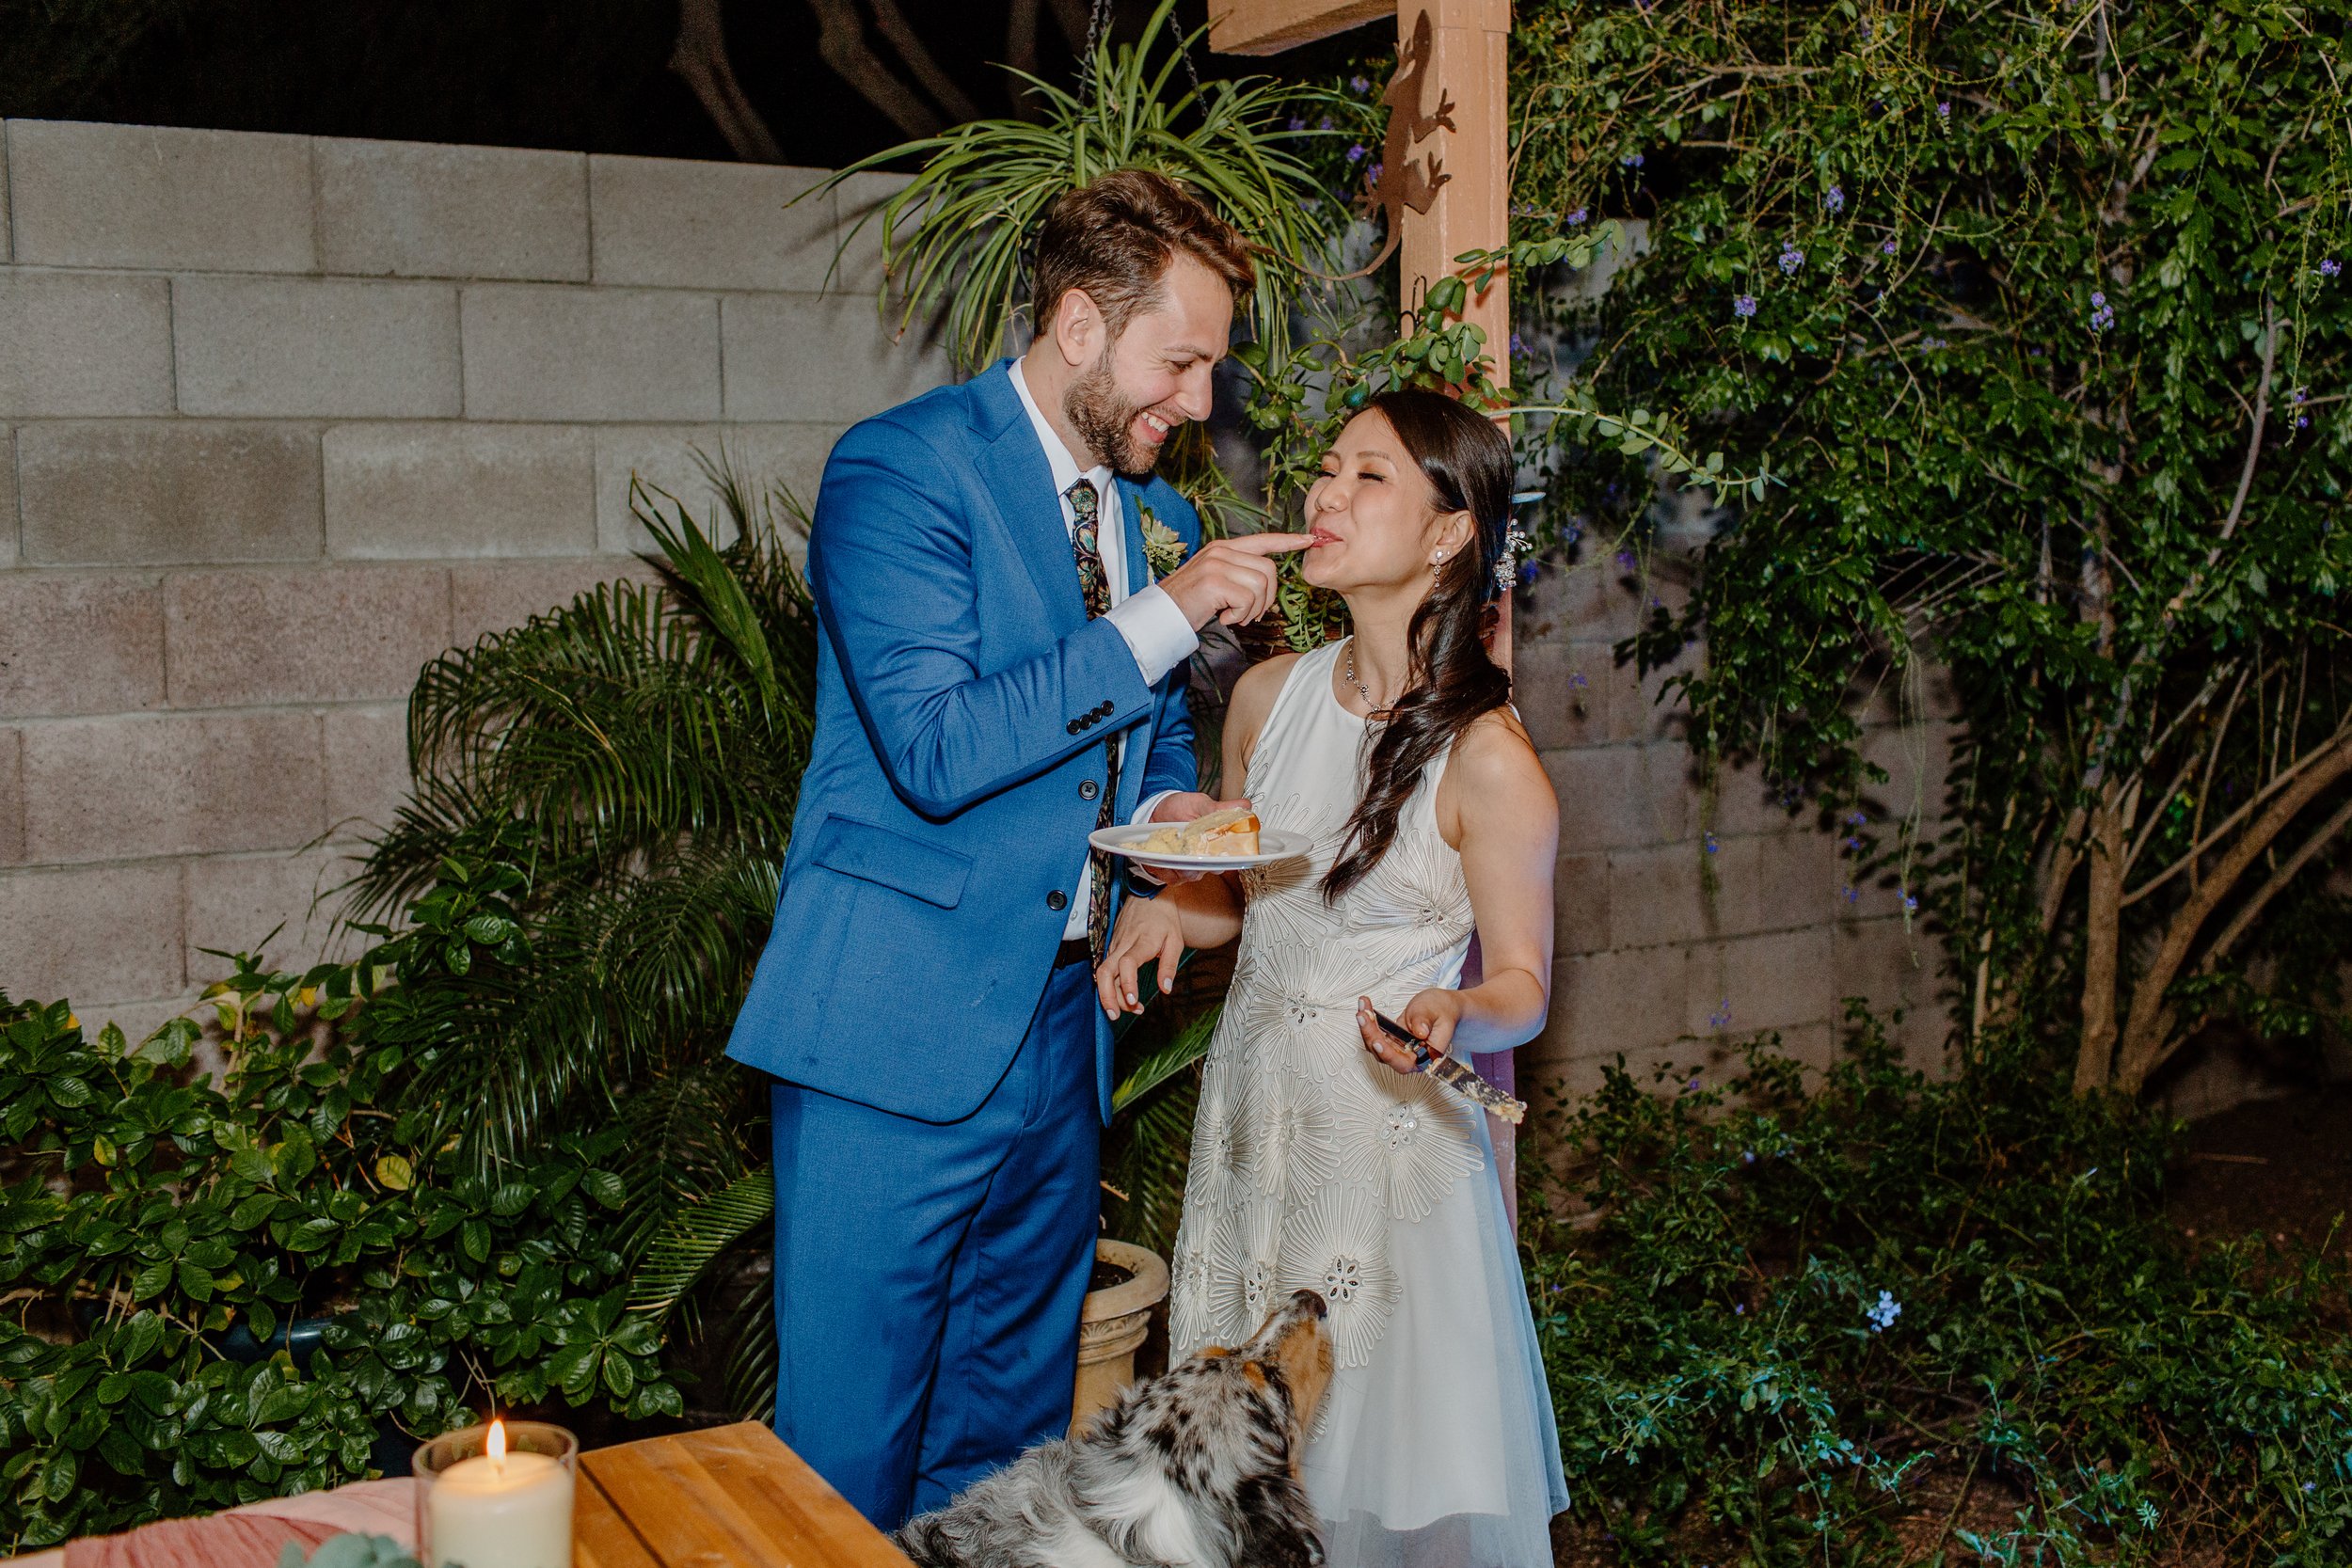  husband and wife eating wedding cake at reception by Lucy bouman photo 